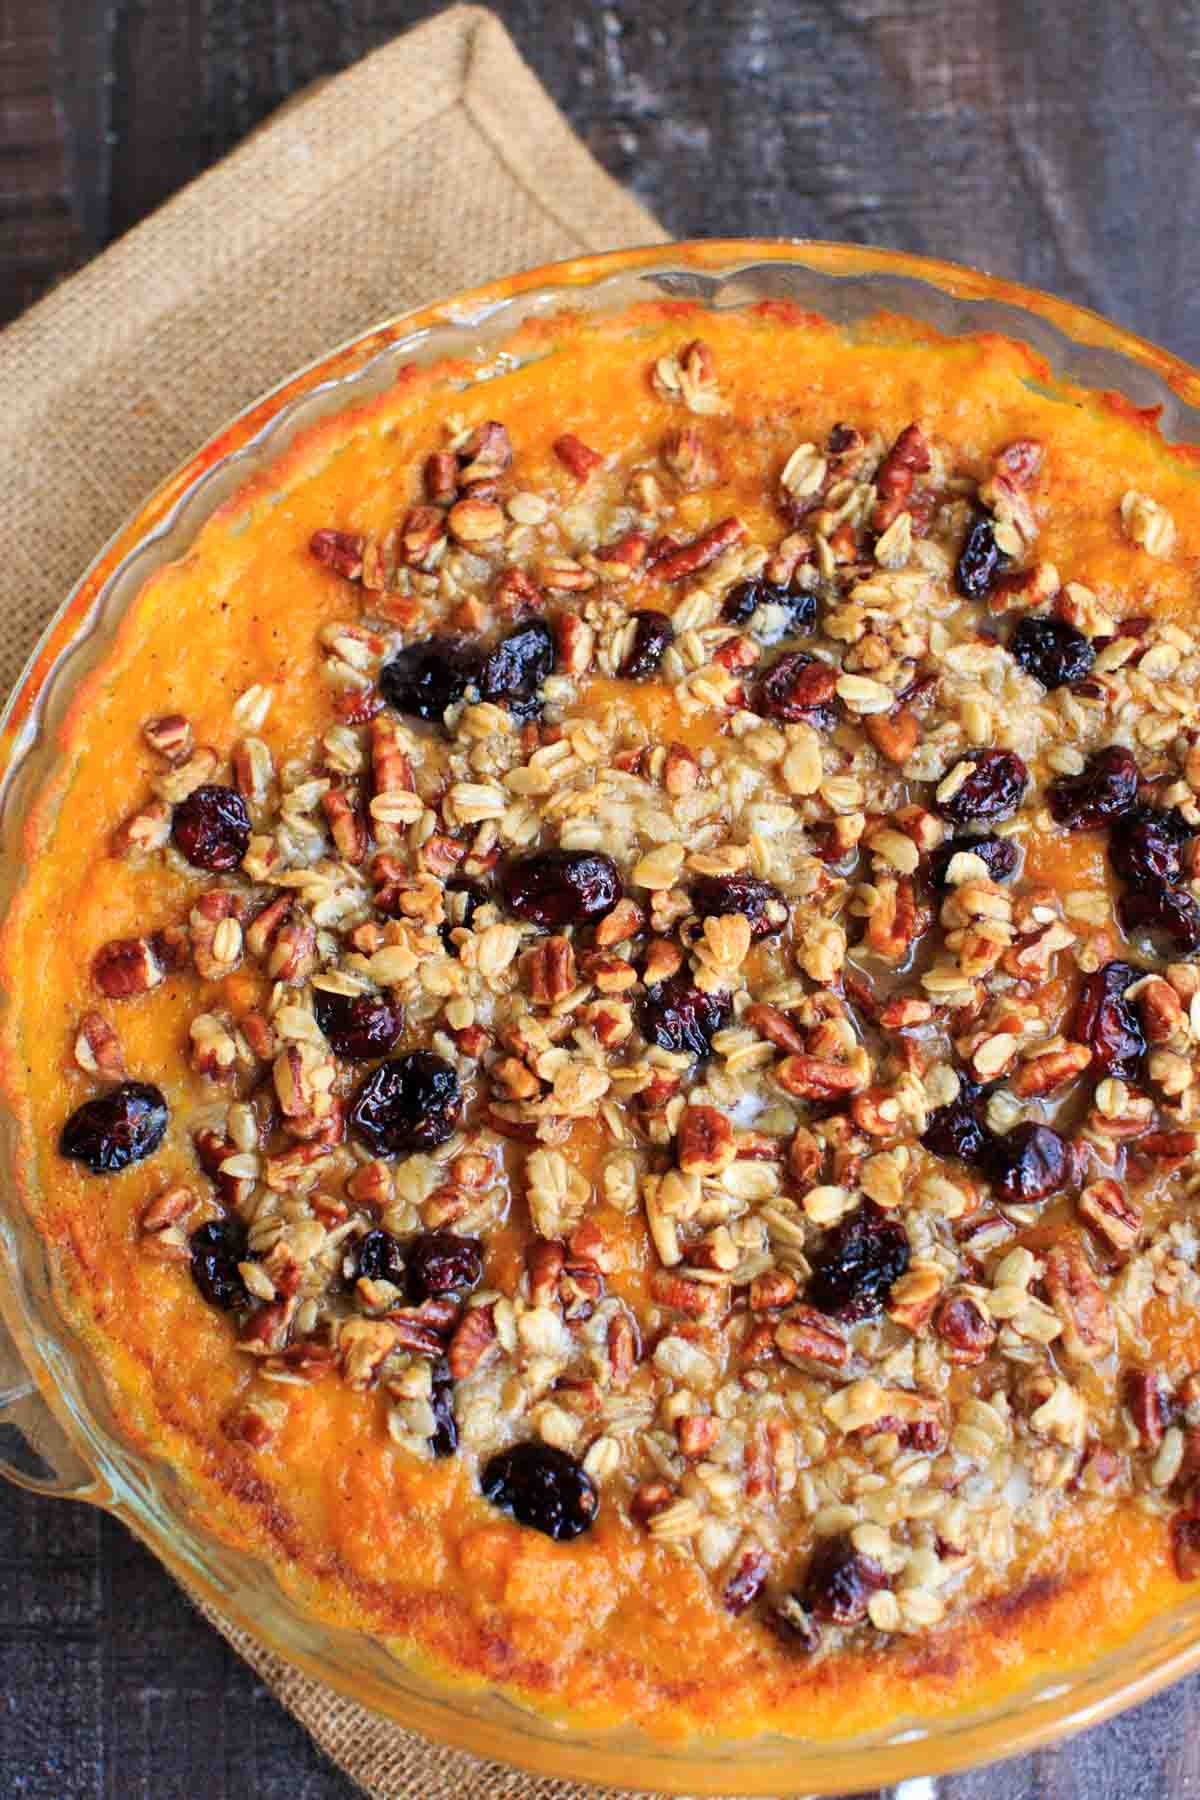 Sweet potato casserole with an oat, pecan and cranberries topping and sweetened with maple syrup. No sugar added!